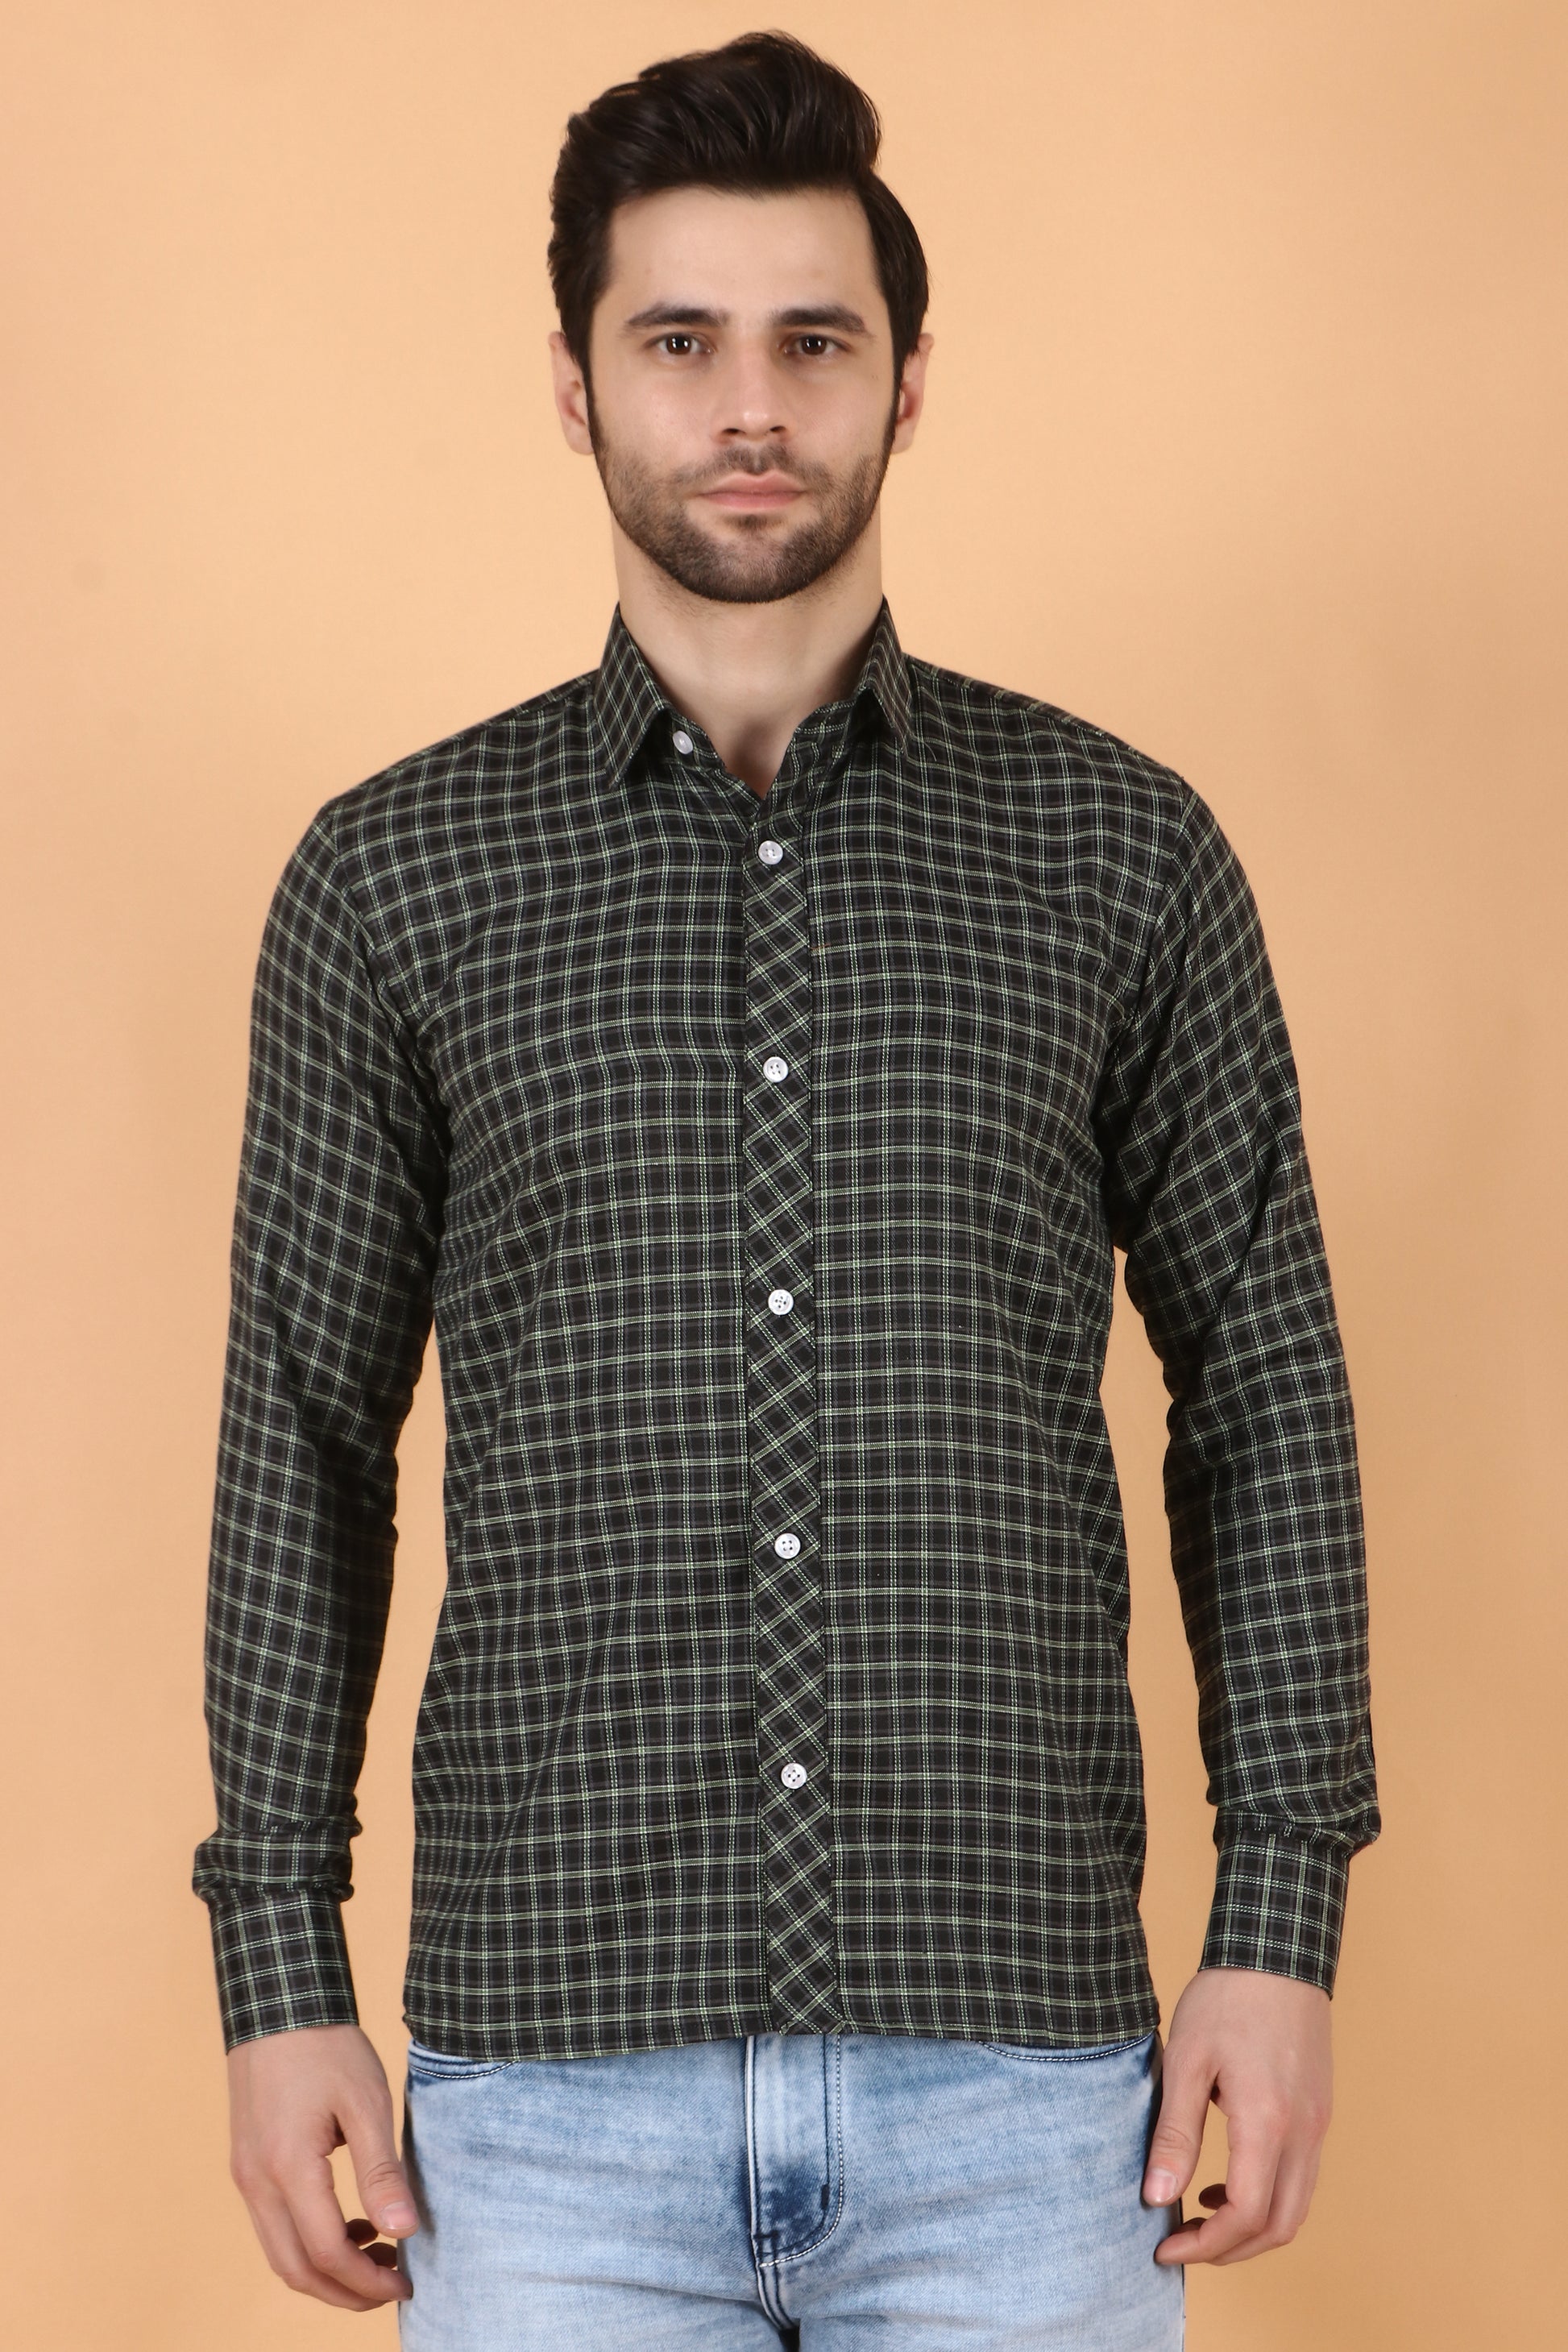 Winter Shirts For Men